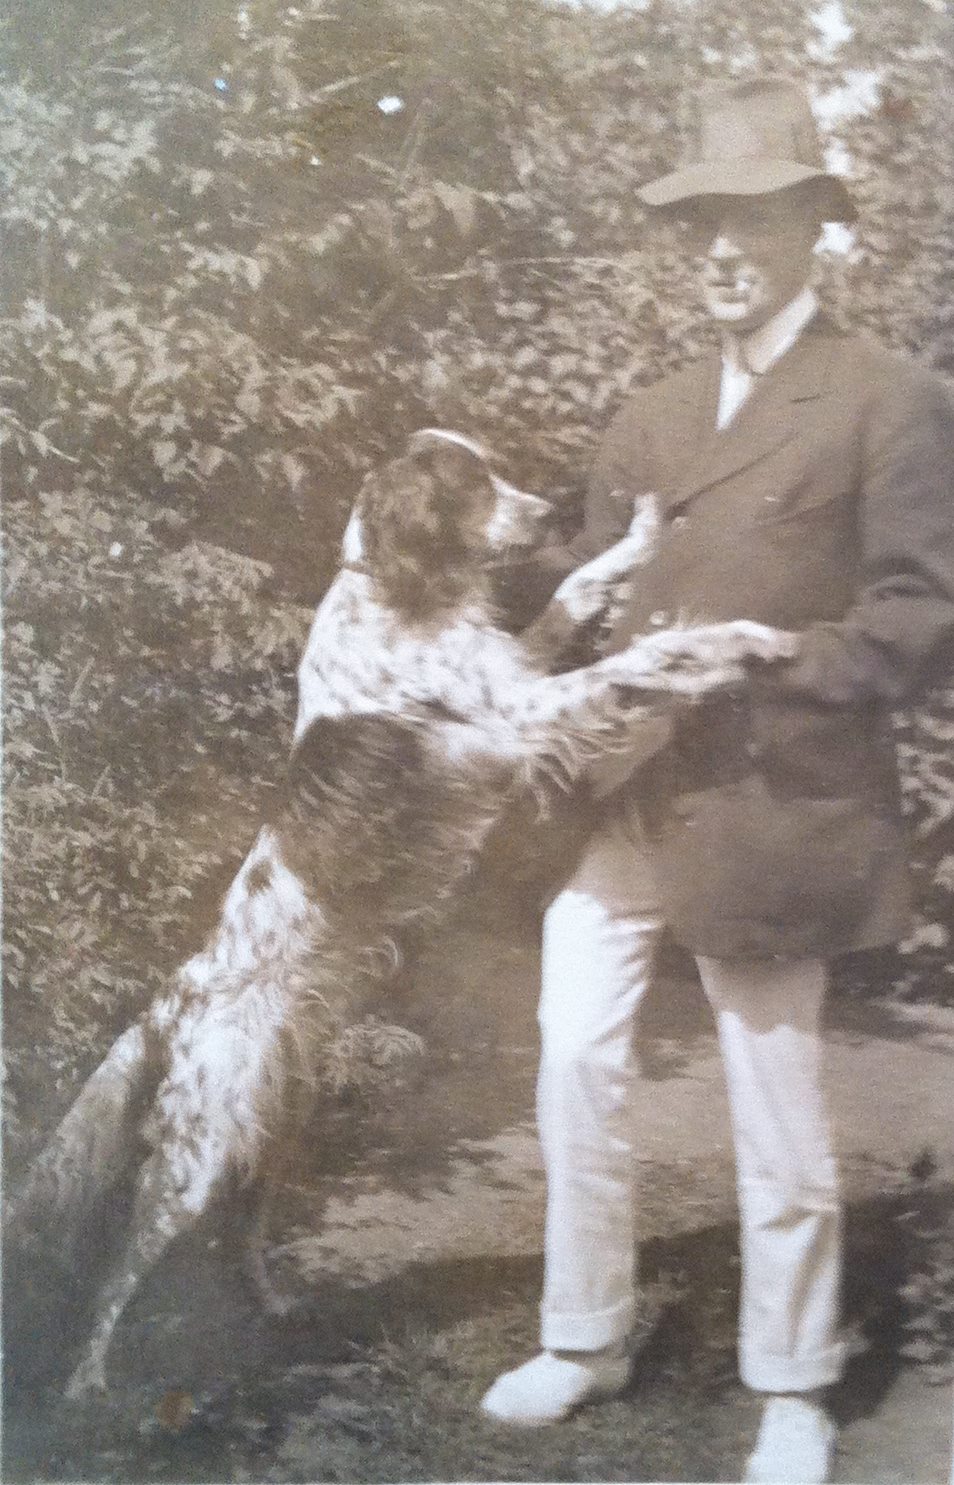 A dog standing on hind legs, front paws on a properly dressed man.